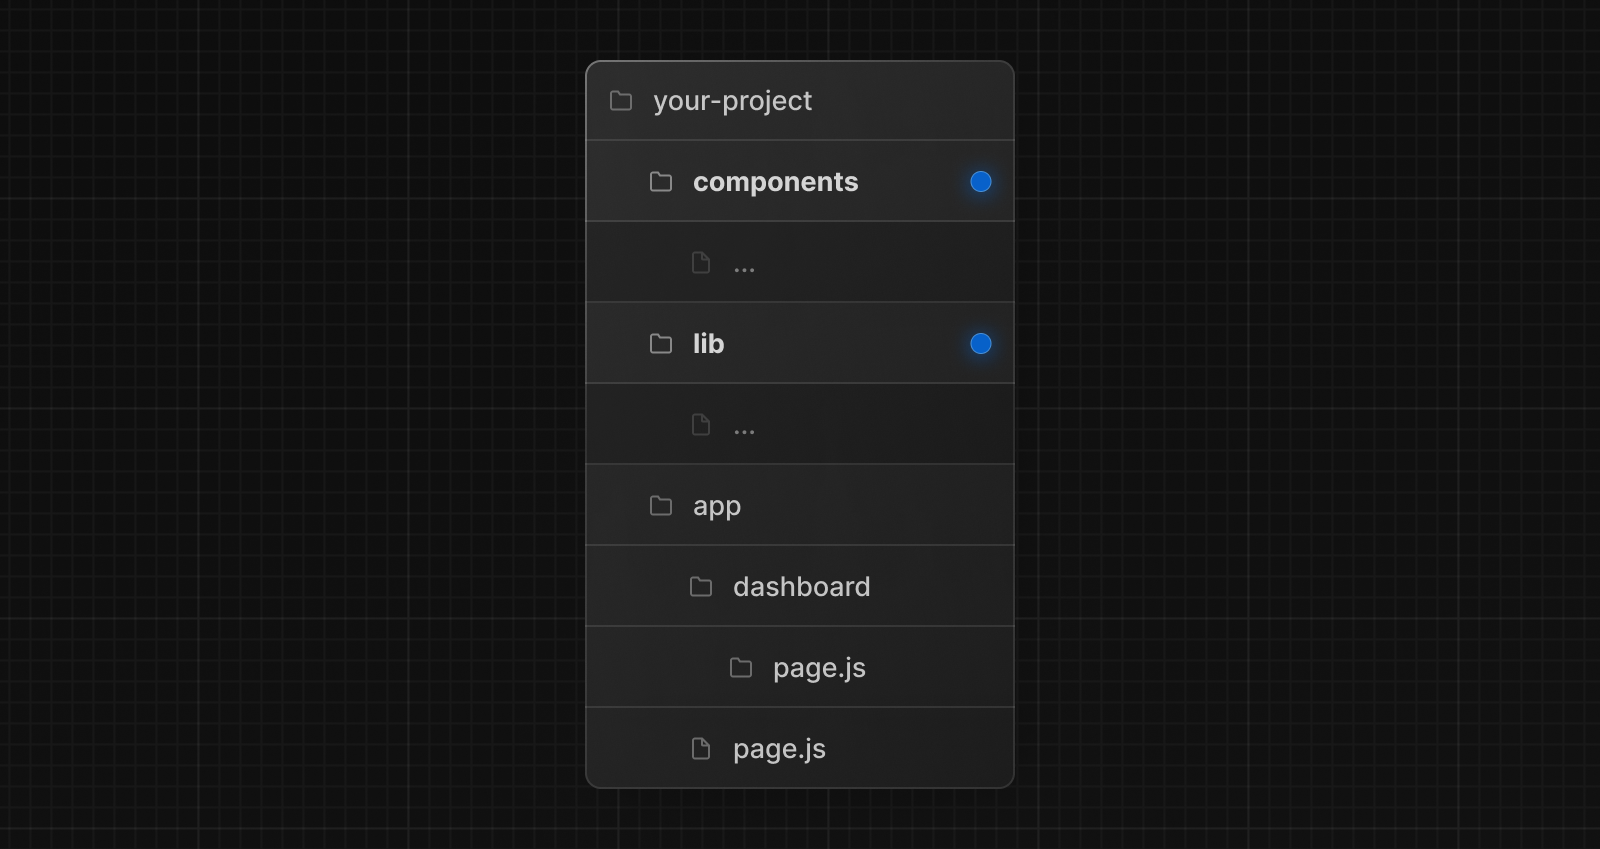 An example folder structure with project files outside of app